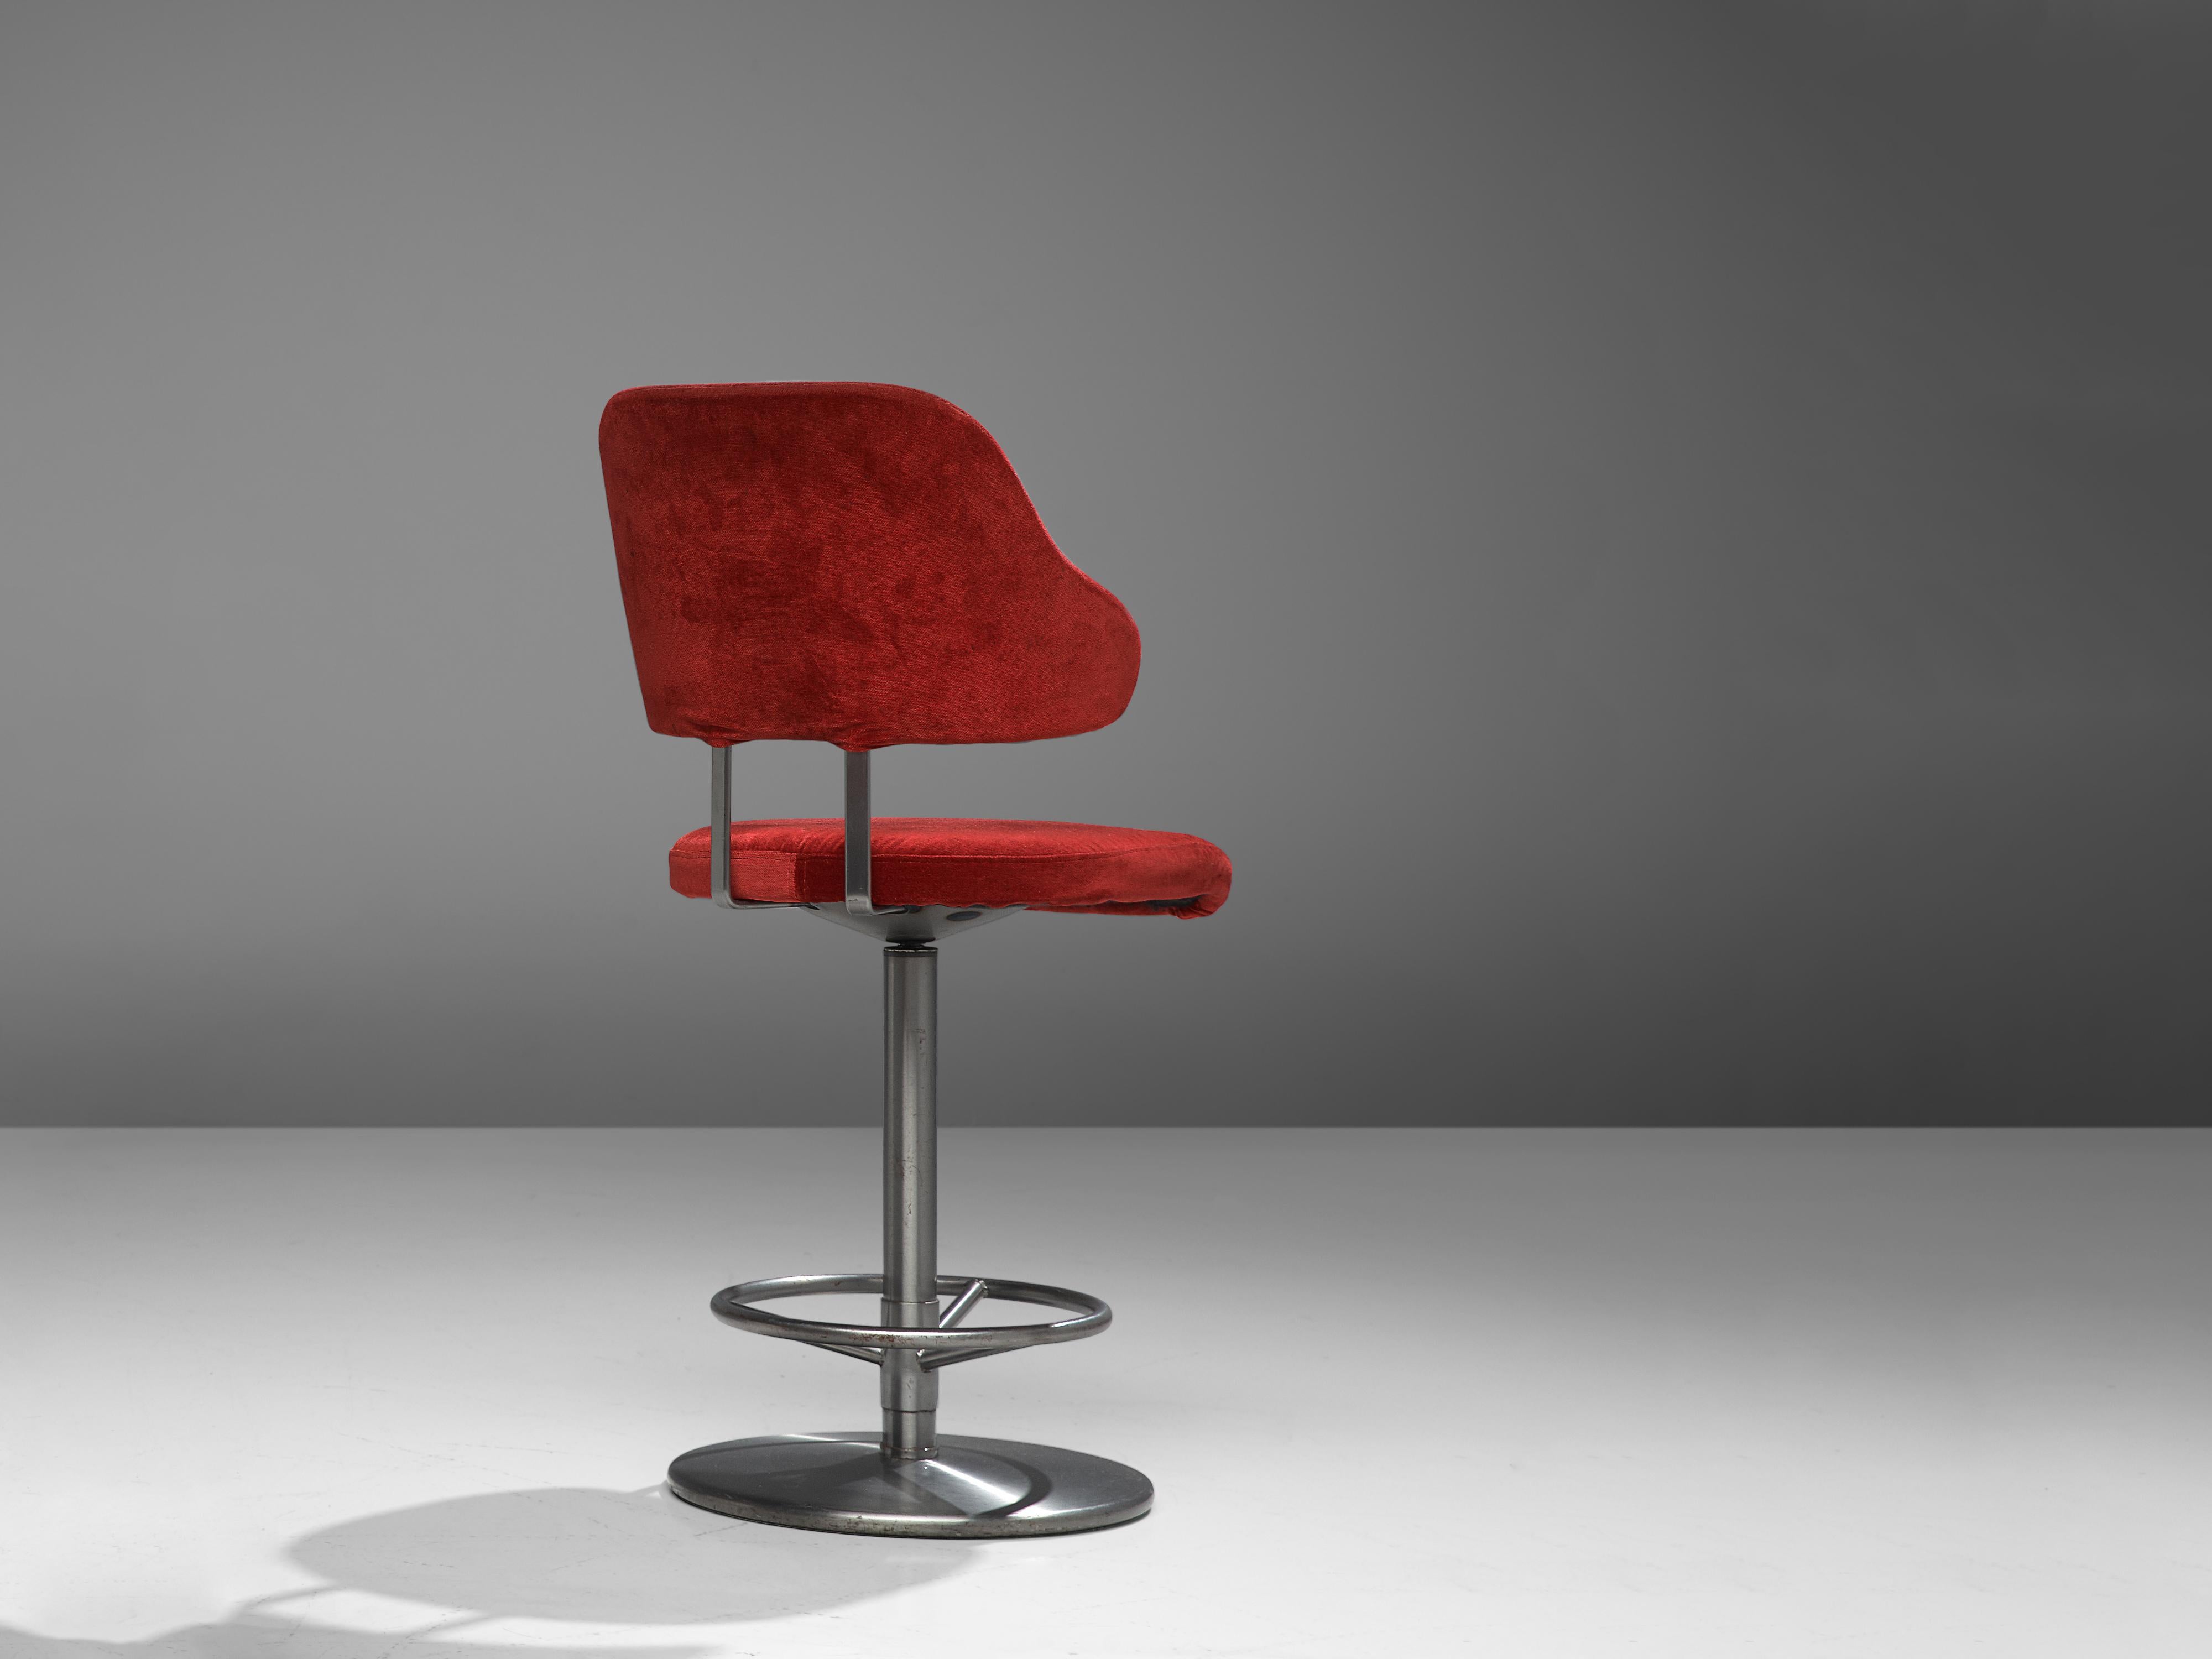 Barstool, metal, velvet upholstery, Europe, 1970s

This barstool is currently upholstered in eye-catching red velvet. A comfortable seat and curved backrest have an inviting look. The round base includes a footrest.

Please note that we advise